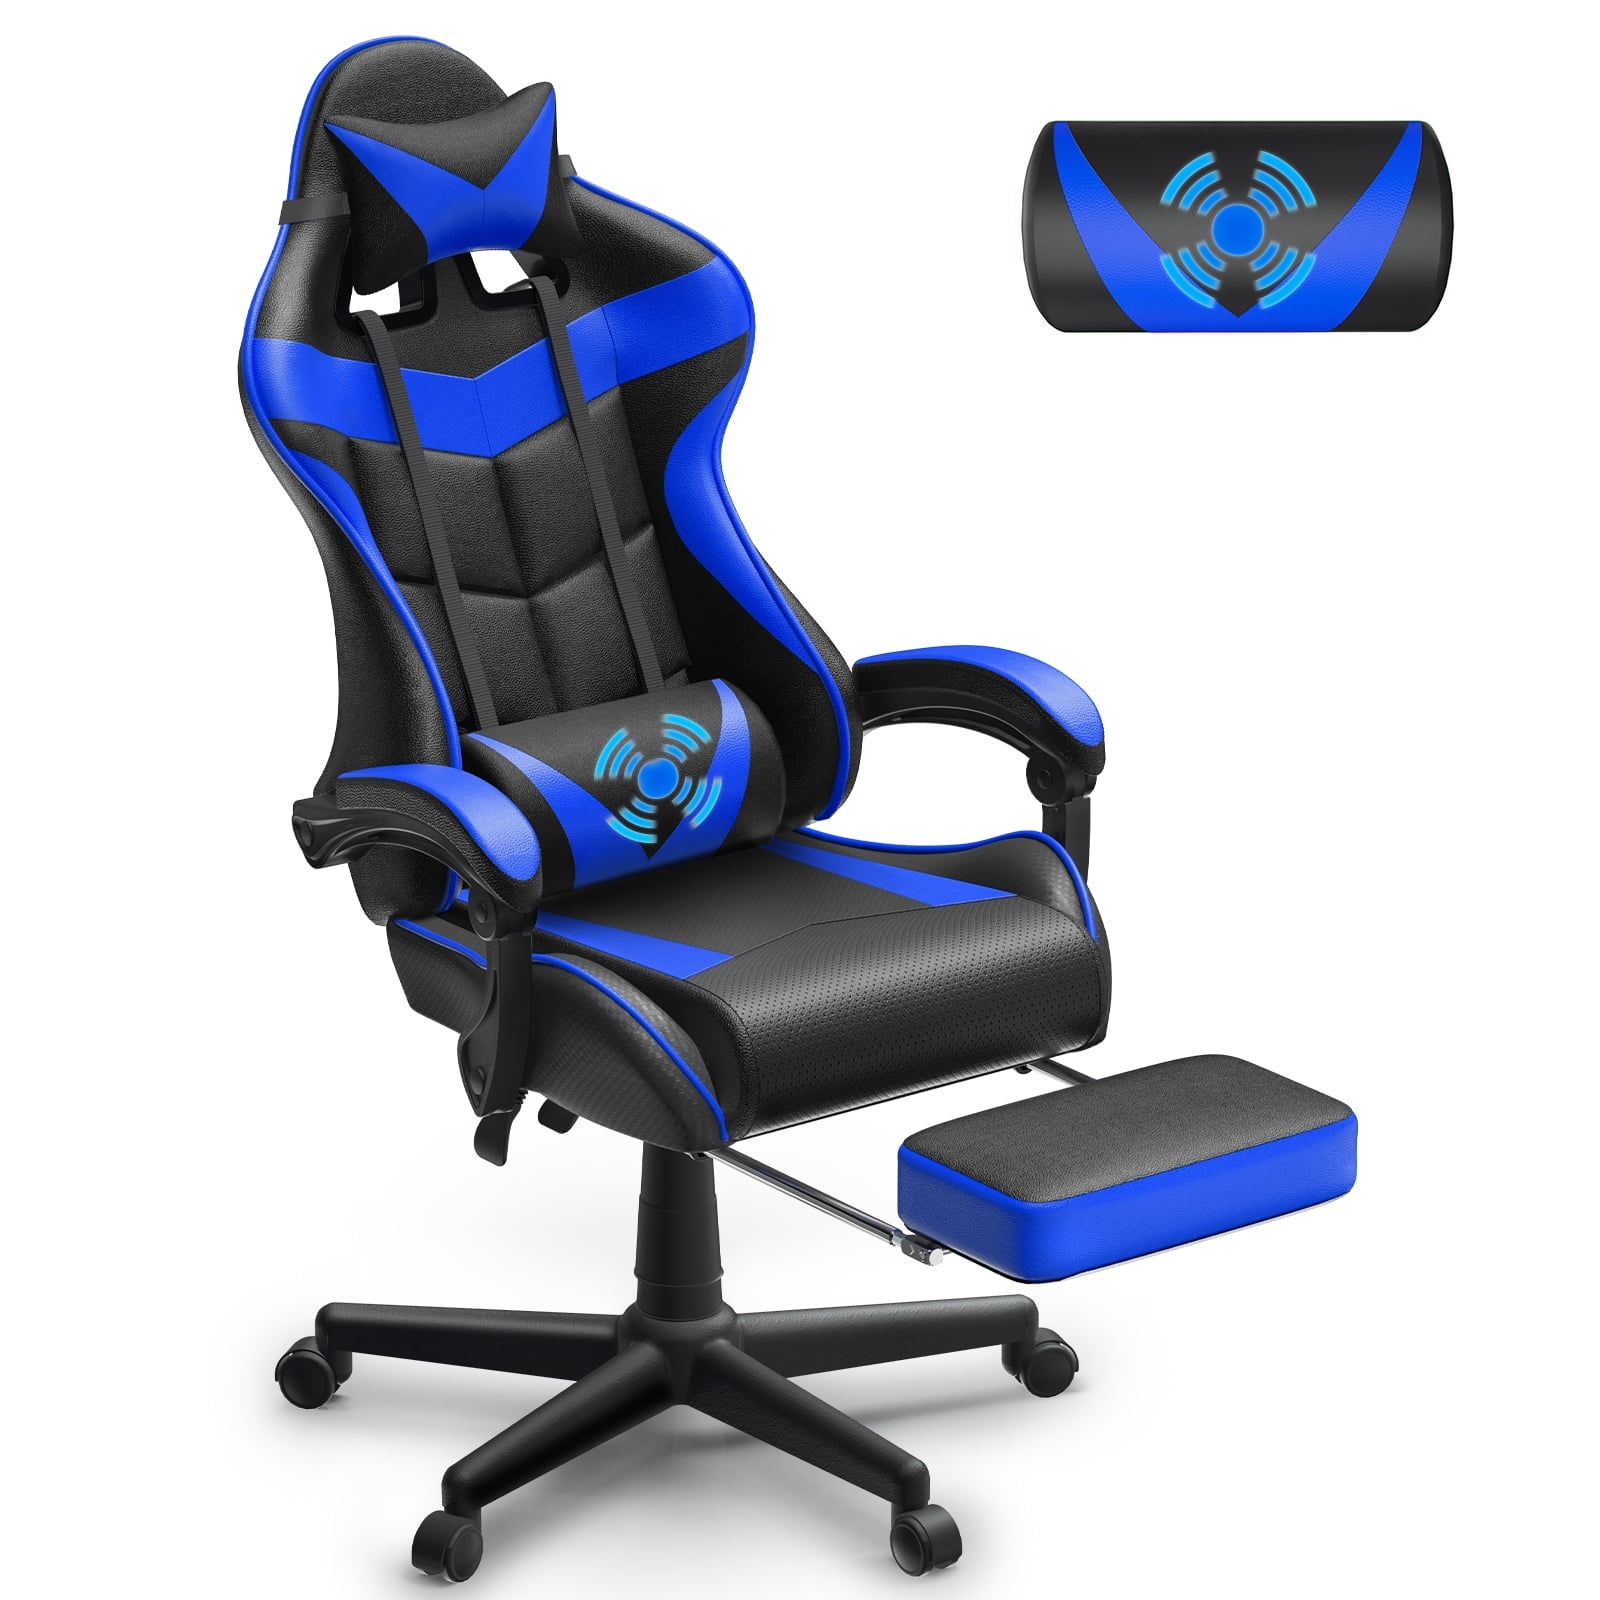 gaming chairs with footrest: Gaming Chairs with Footrests - Experience  ultimate gaming comfort everyday - The Economic Times